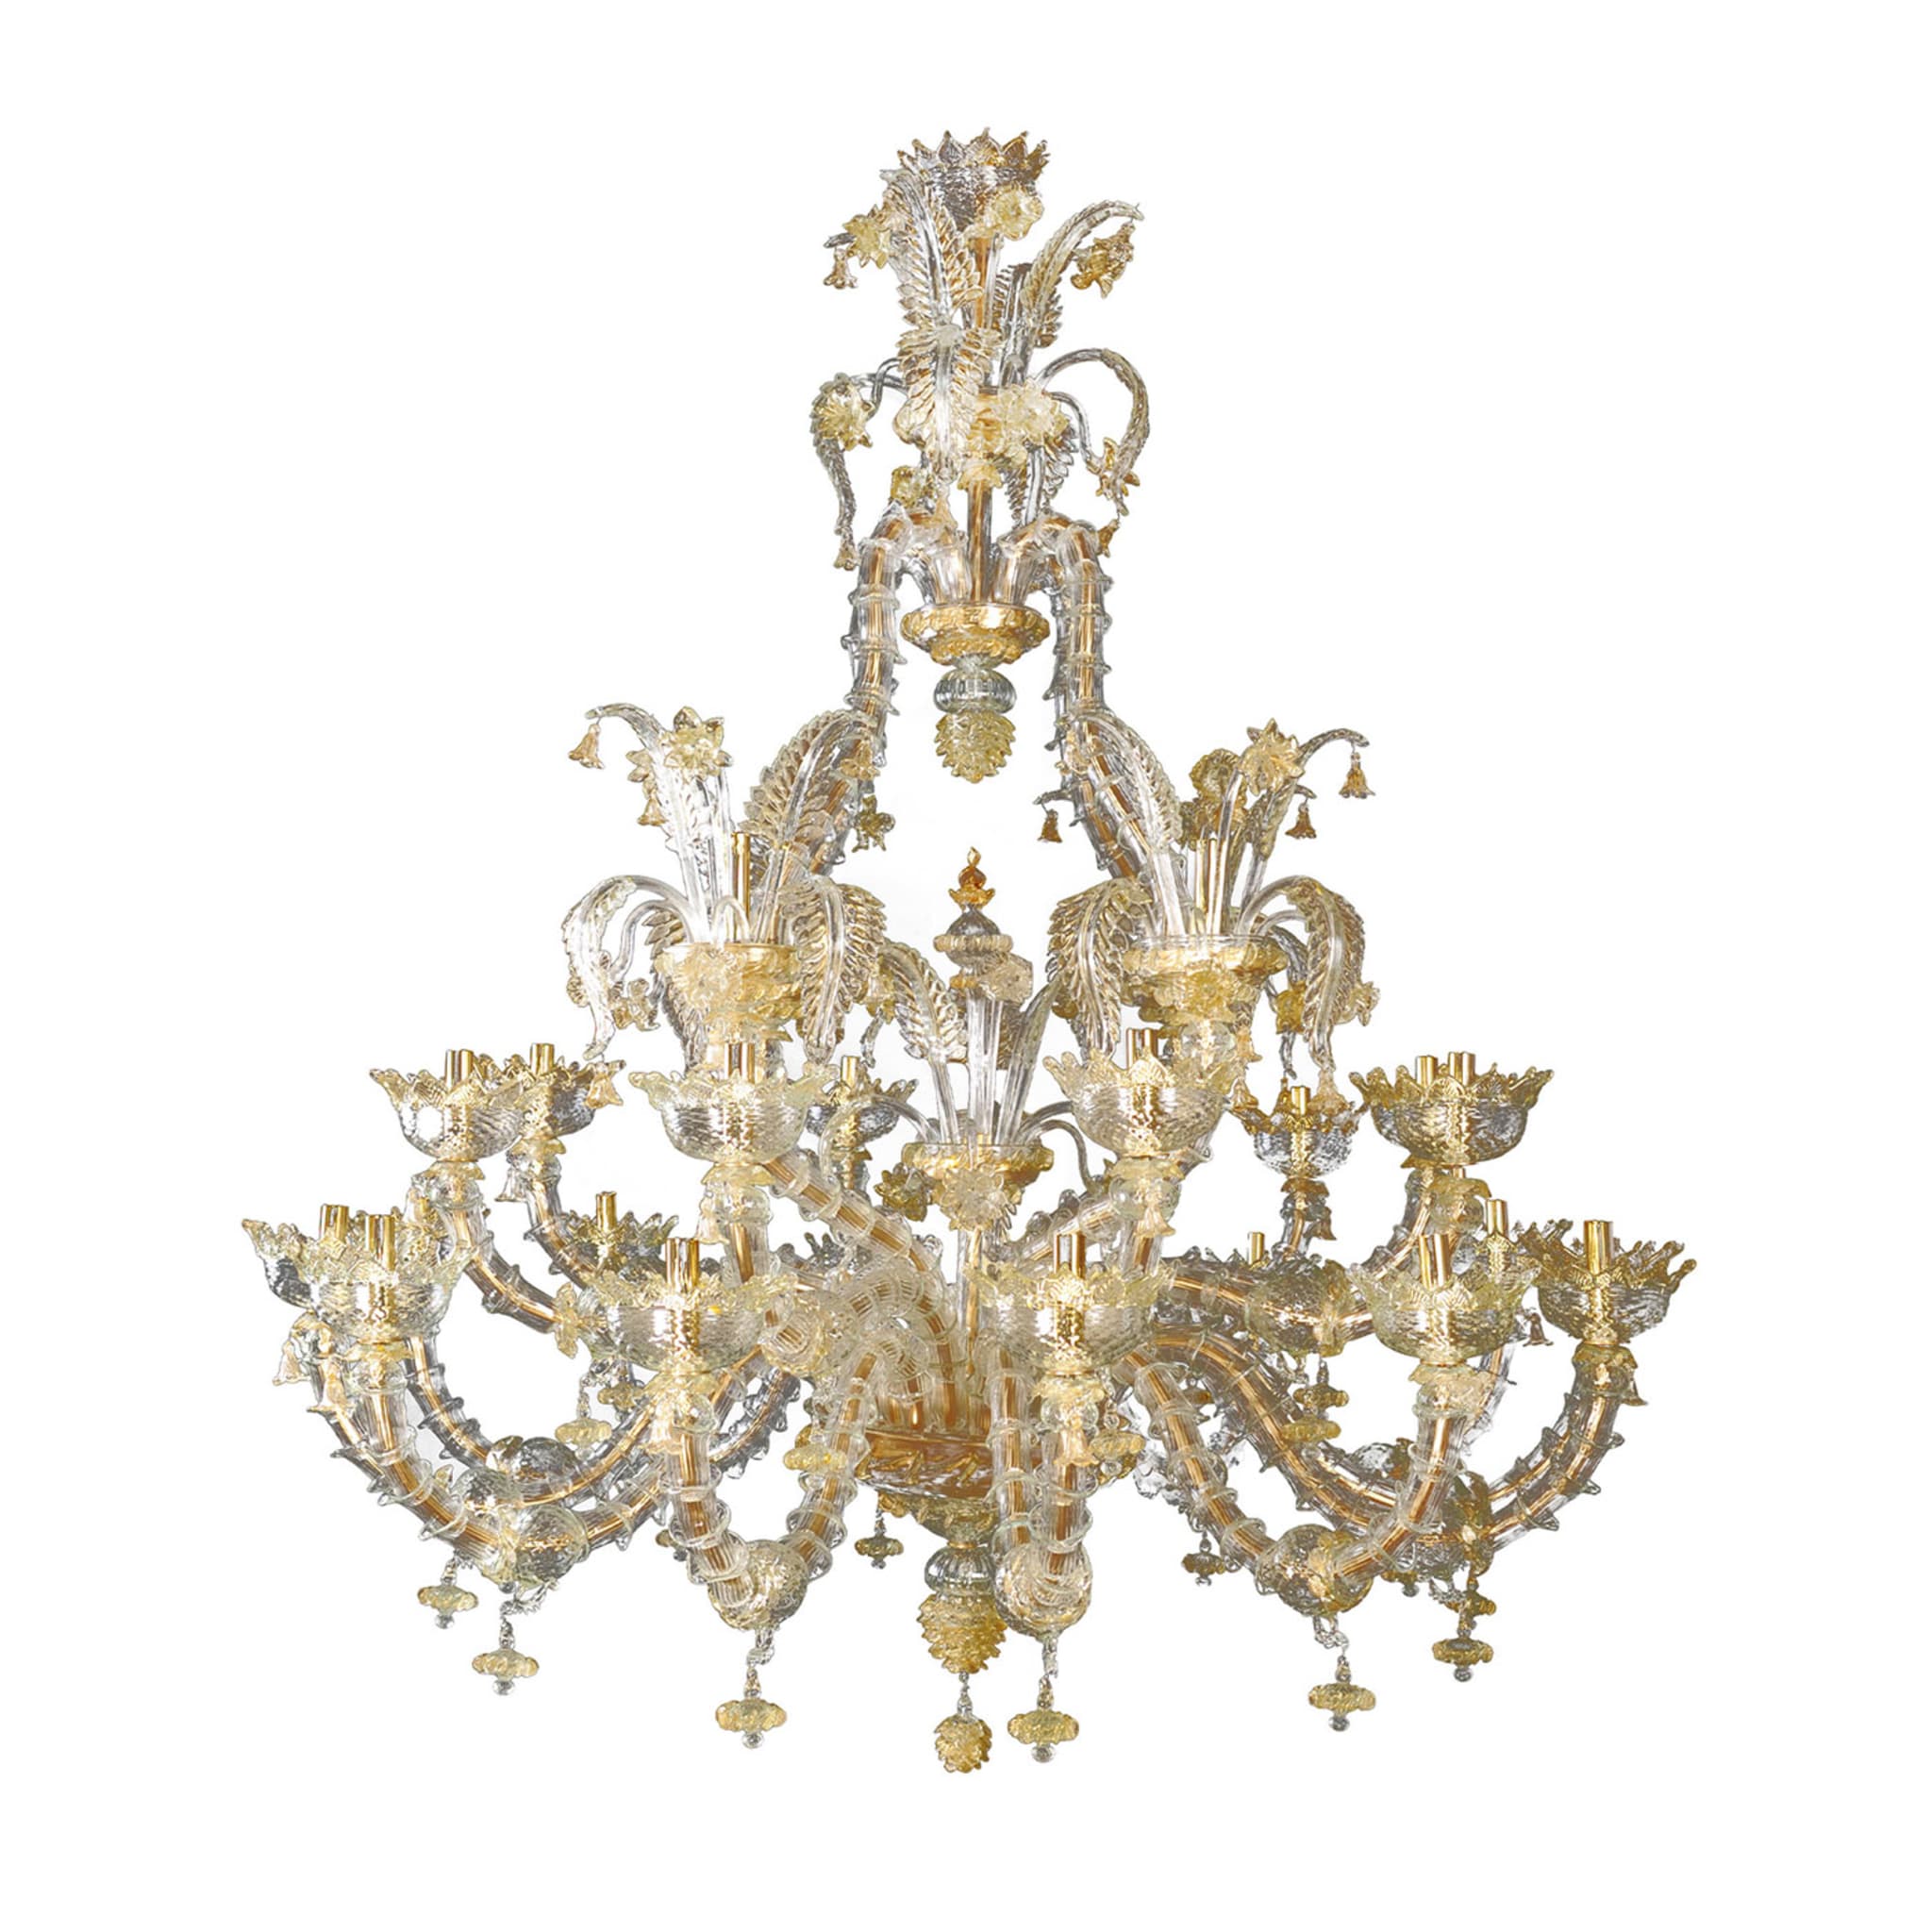 Rezzonico-style Gold and Crystal Chandelier #7 - Main view